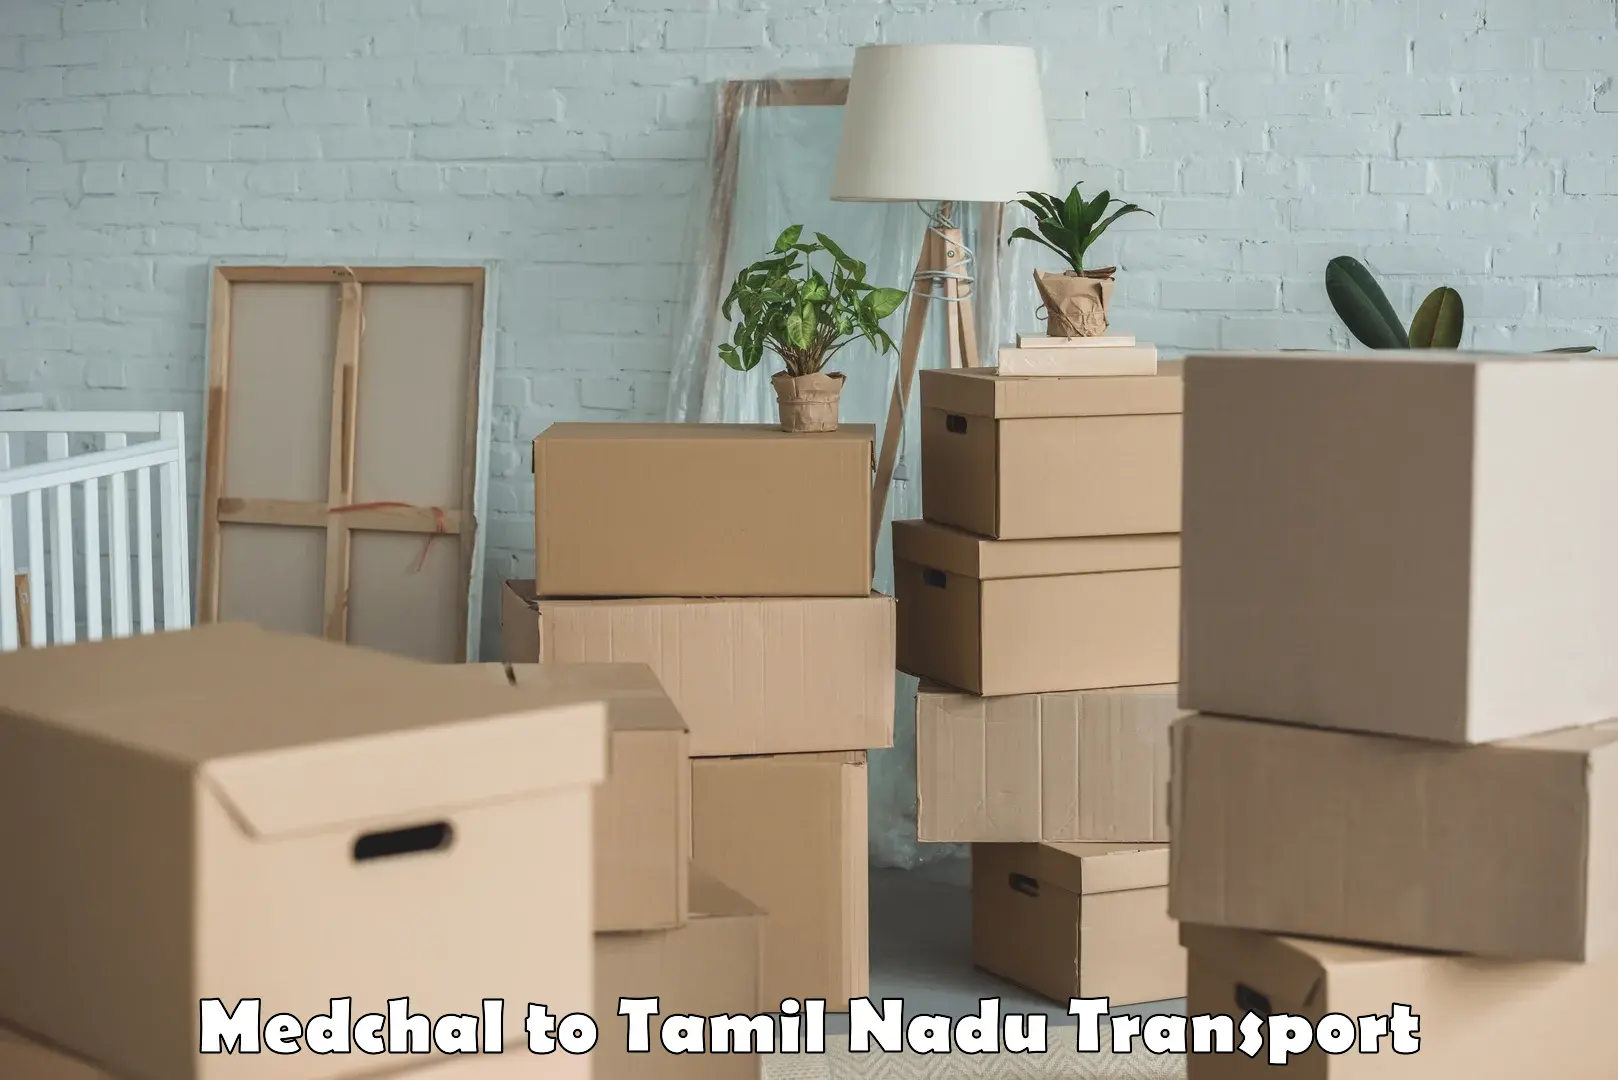 Truck transport companies in India Medchal to Sivakasi